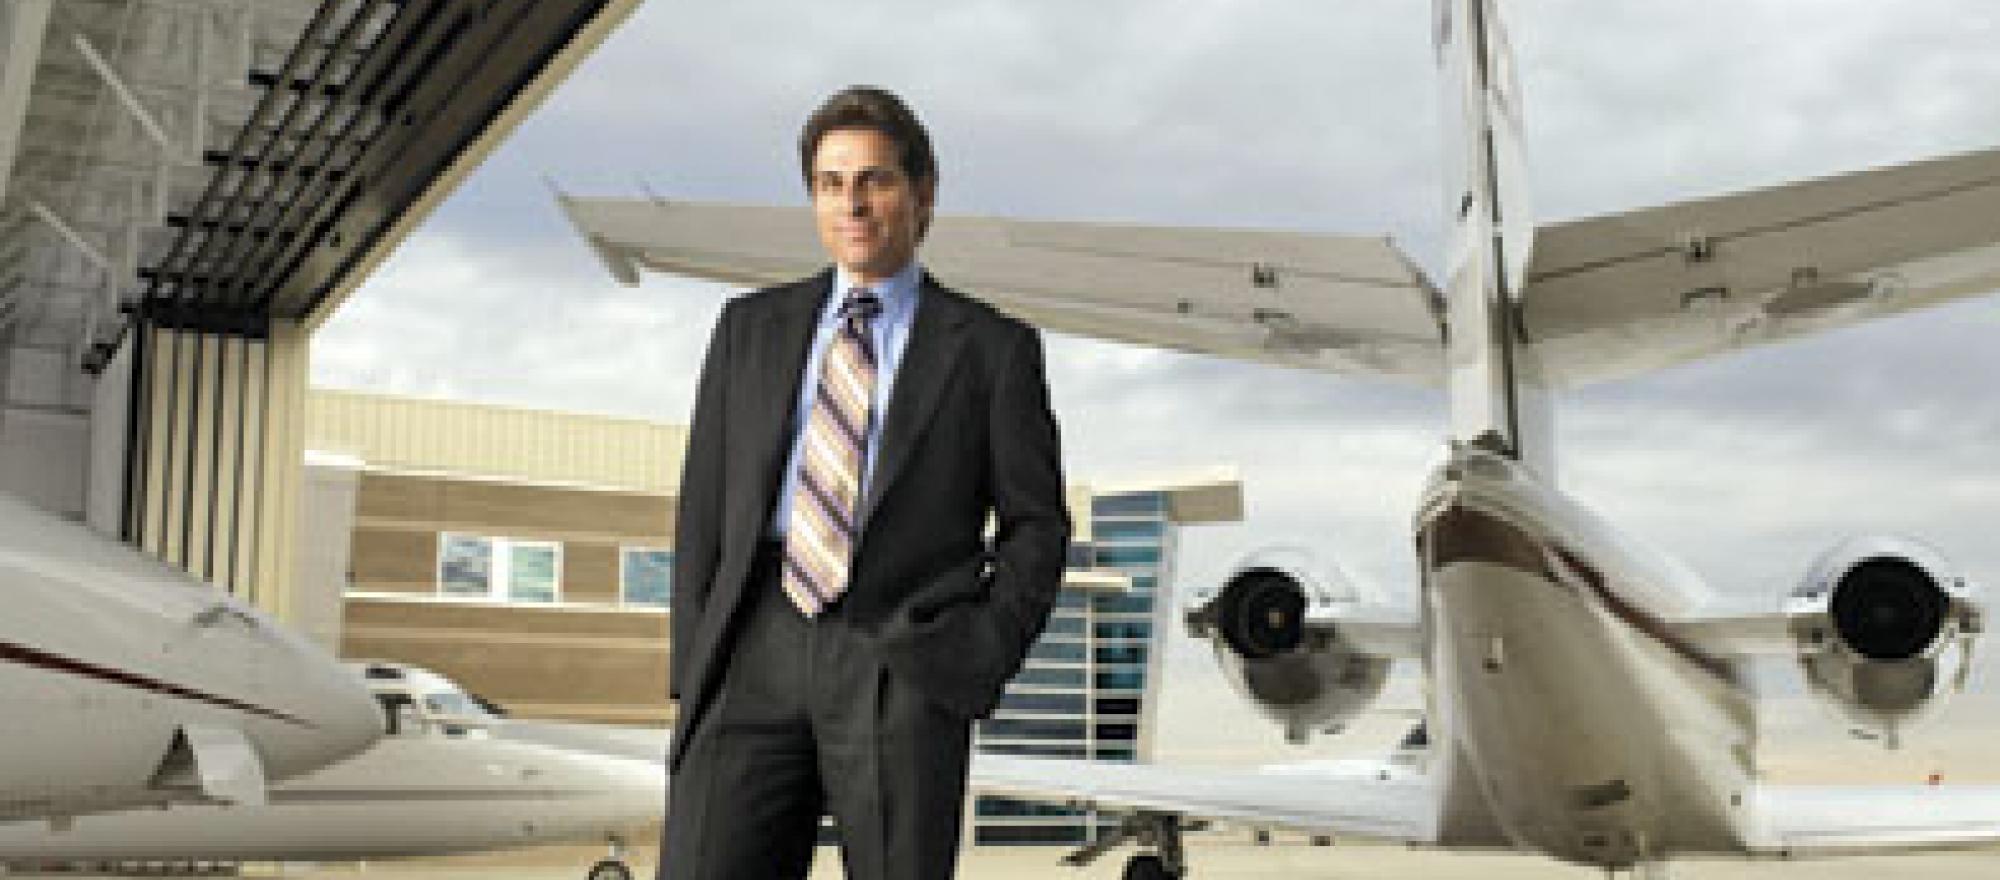 Kenn Ricci, who founded Flight Options and left the company in 2003, returned